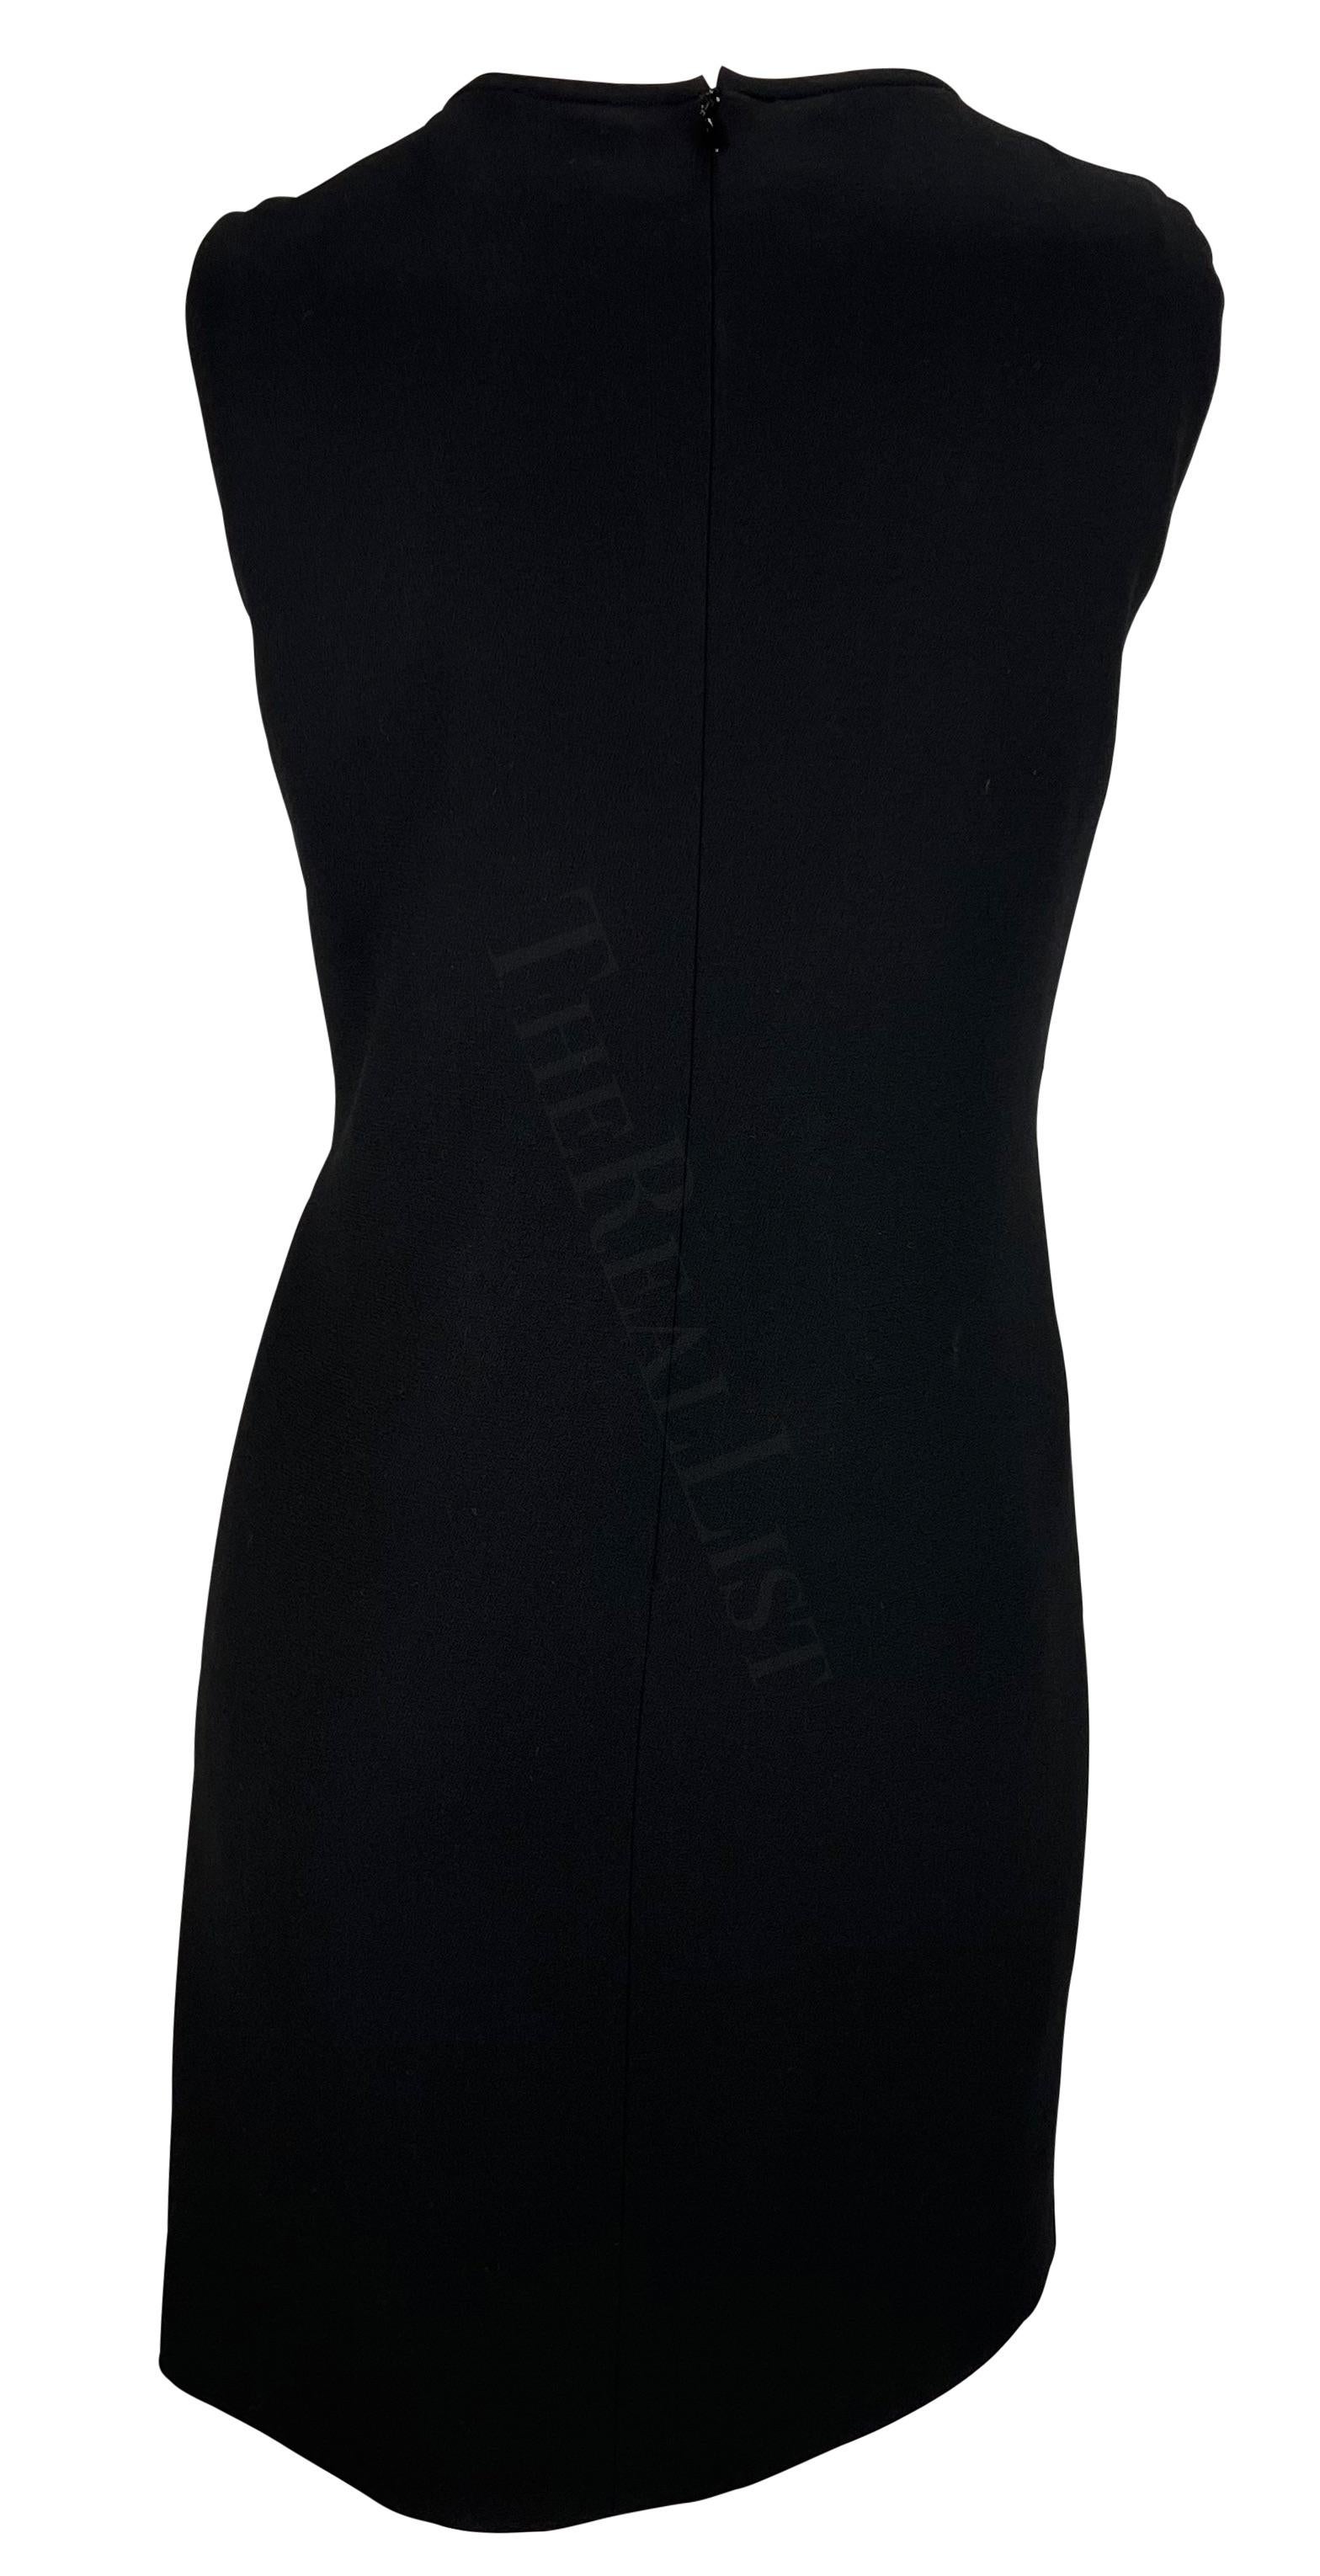 NWT F/W 1997 Gianni Versace Couture Cutout Black Wool Shift Dress For Sale 1